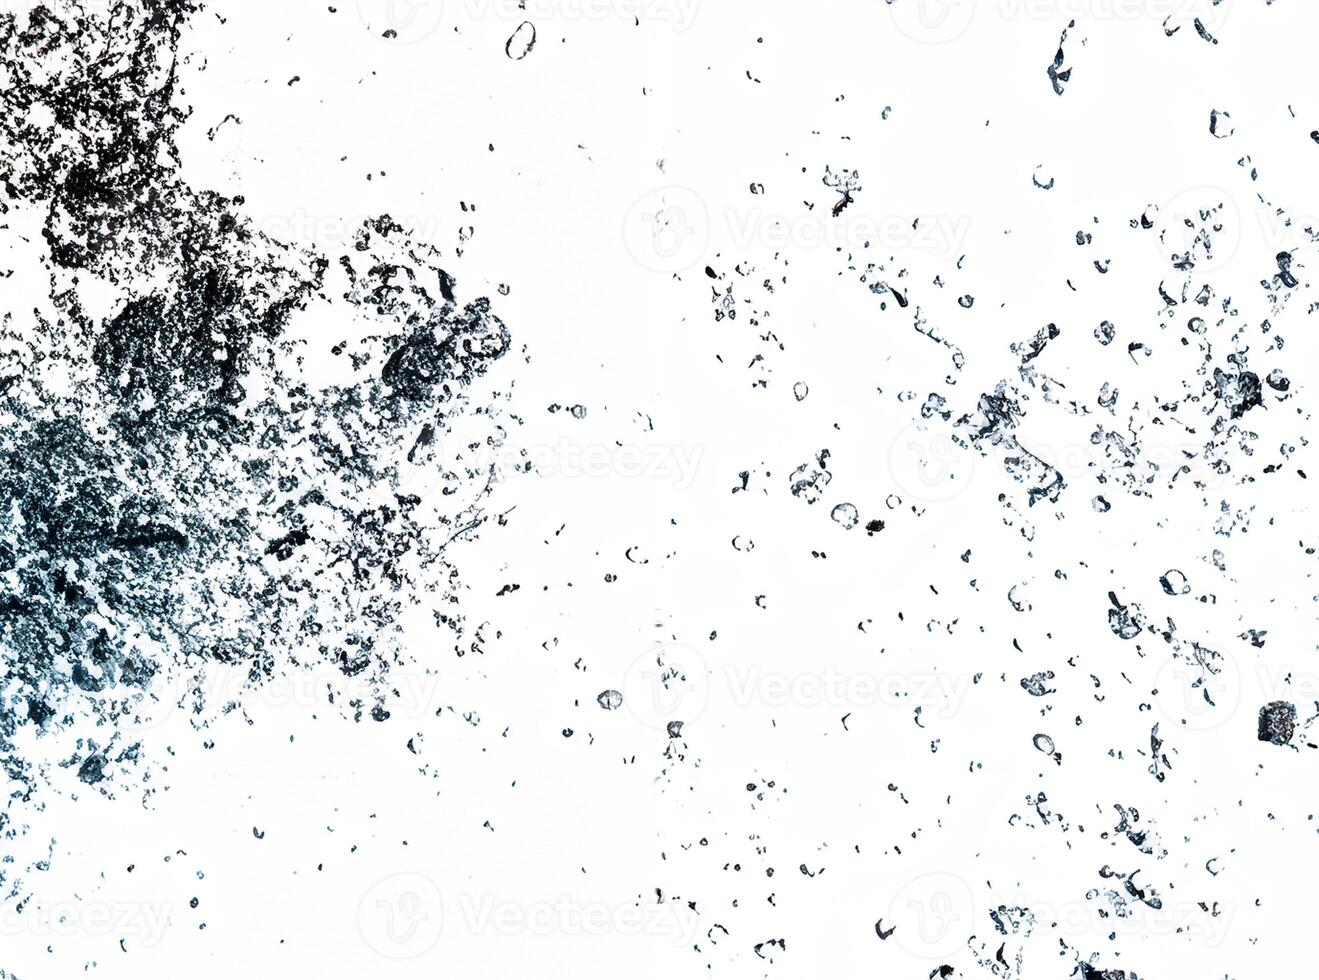 Shape form droplet of Water splashes into drop water line tube attack fluttering in air and stop motion freeze shot. Splash Water for texture graphic resource elements, White background isolated photo